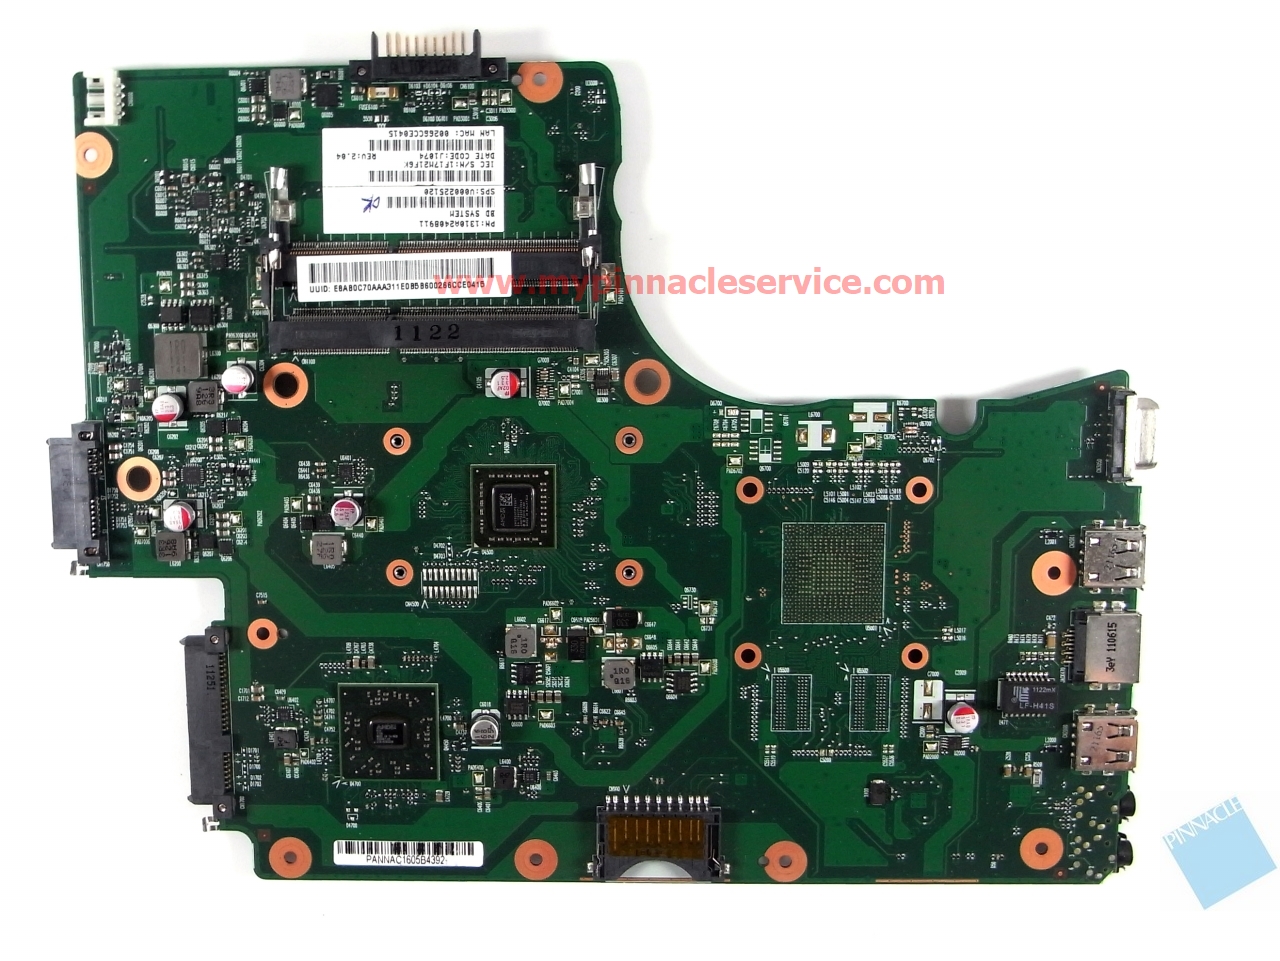 v000225120-motherboard-for-toshiba-satellite-c650d-c655d-6050a2408901-1310a2408911-r0011303.jpg